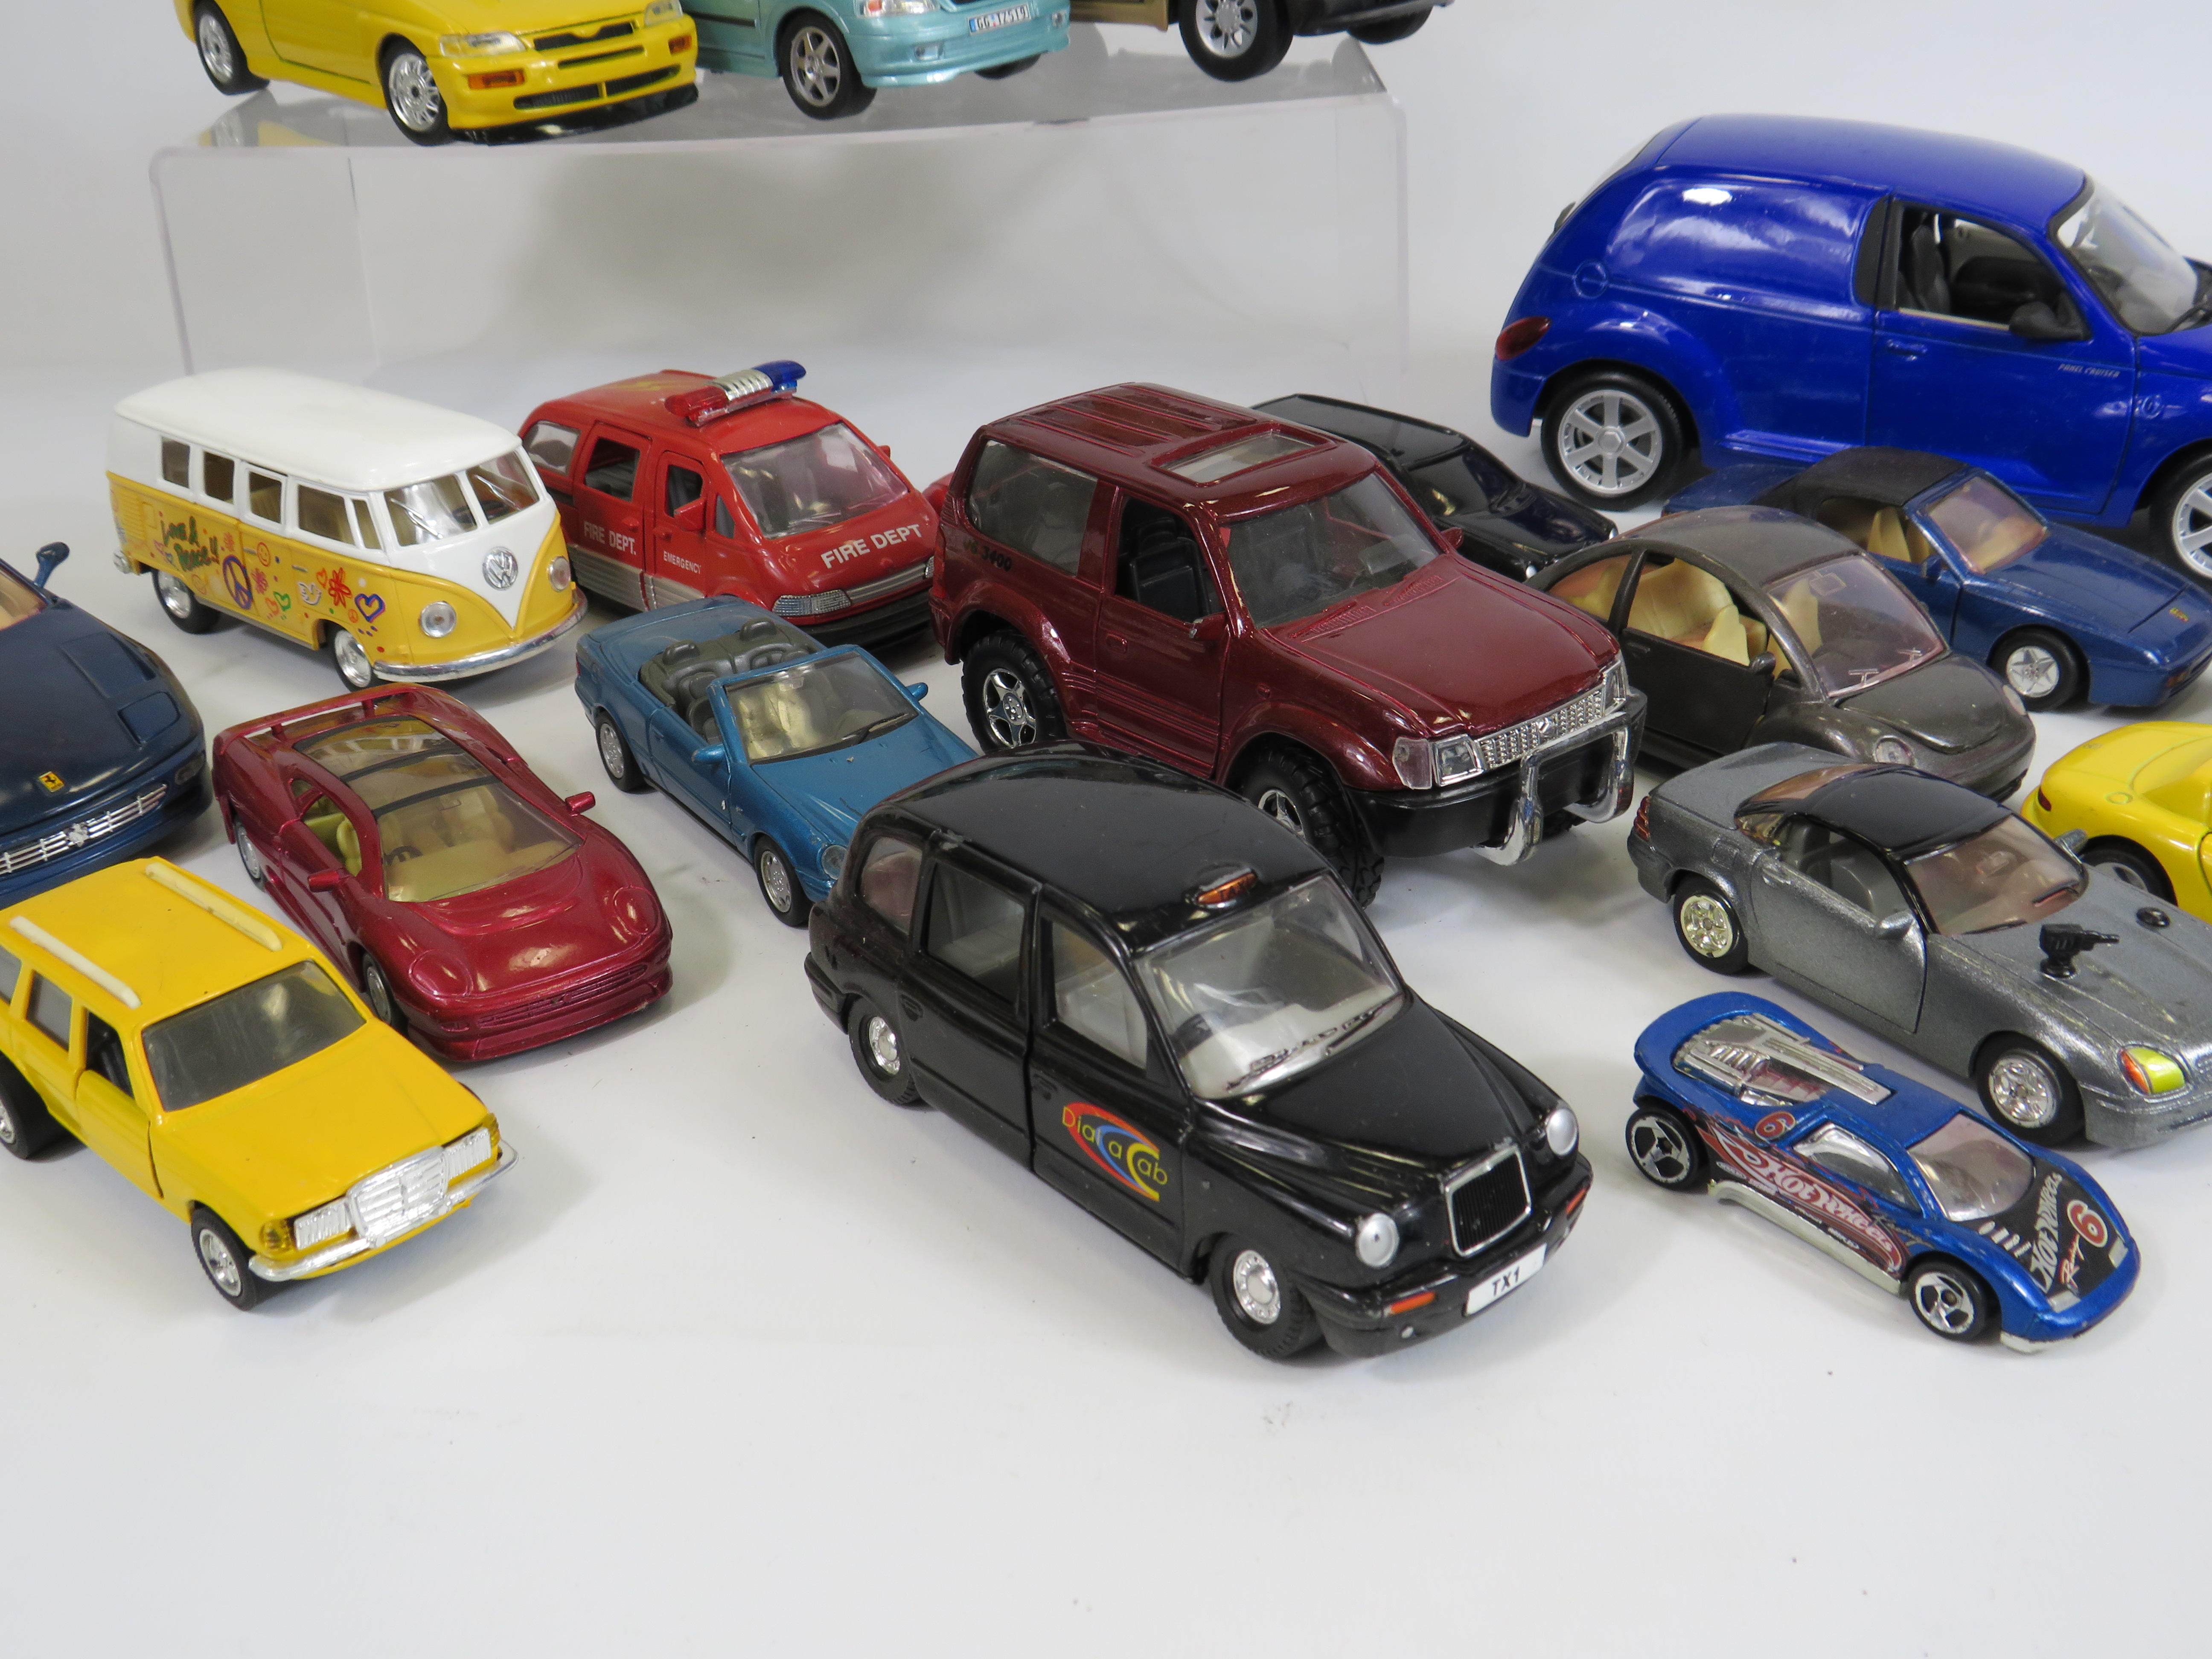 Selection of various diecast playworn vehicles by Maisto, Burago, Welly etc. - Image 2 of 4